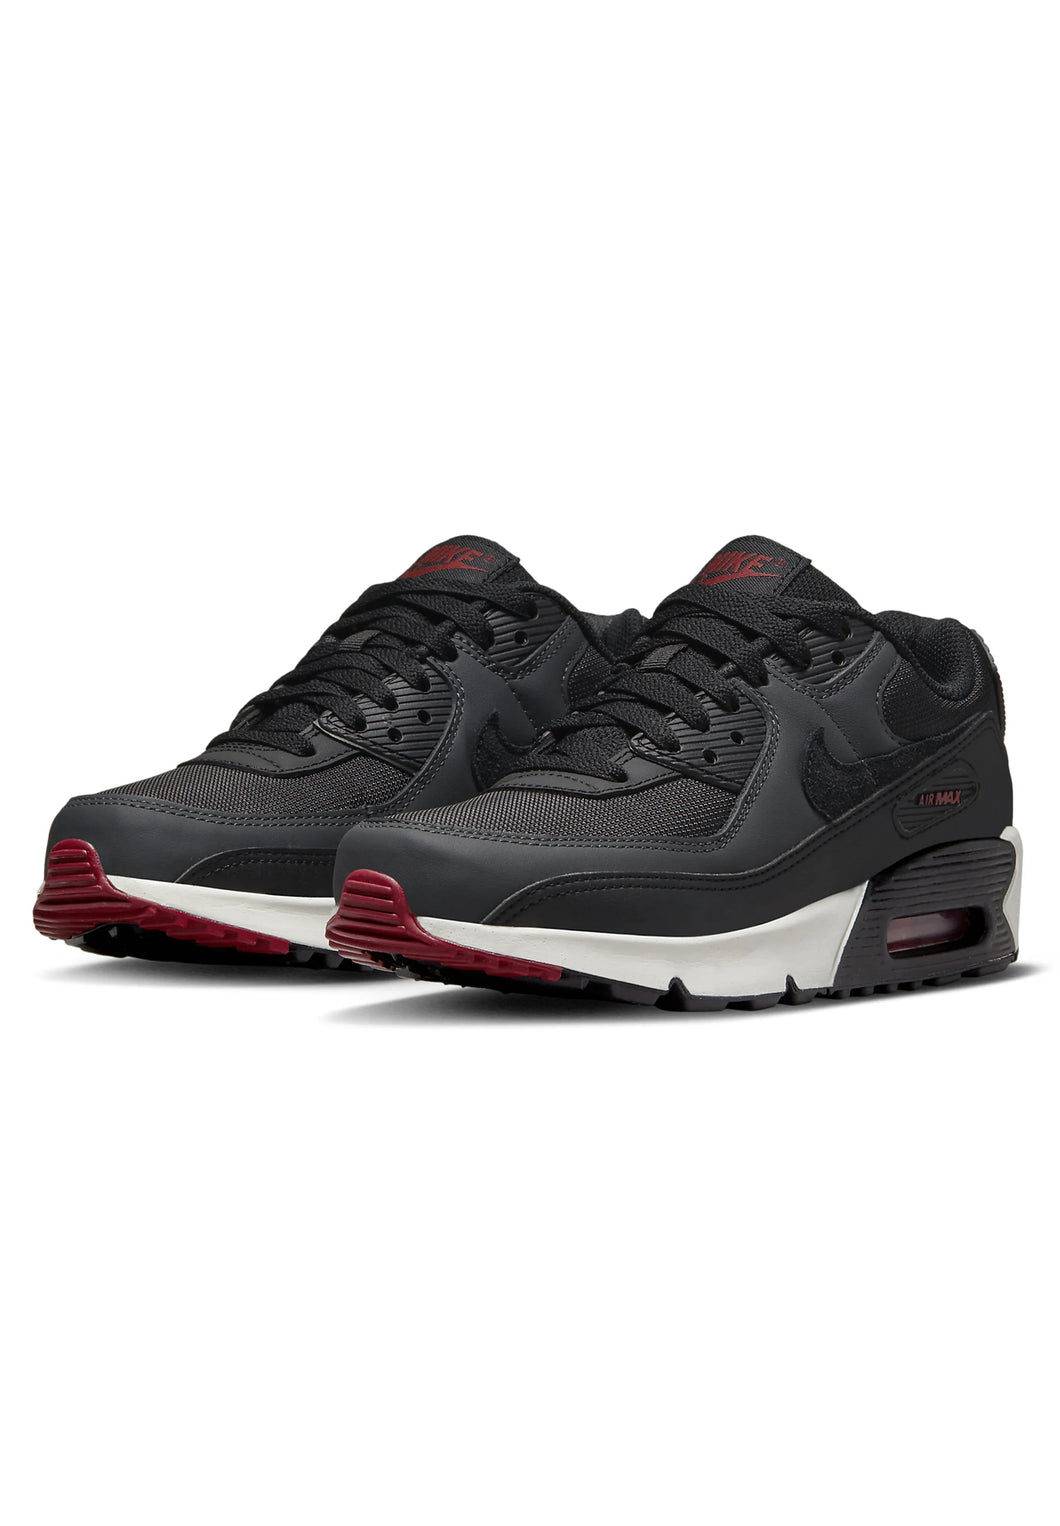 NIKE AIR MAX  90 LTR
ANTHRACITE TEAM RED (GS)